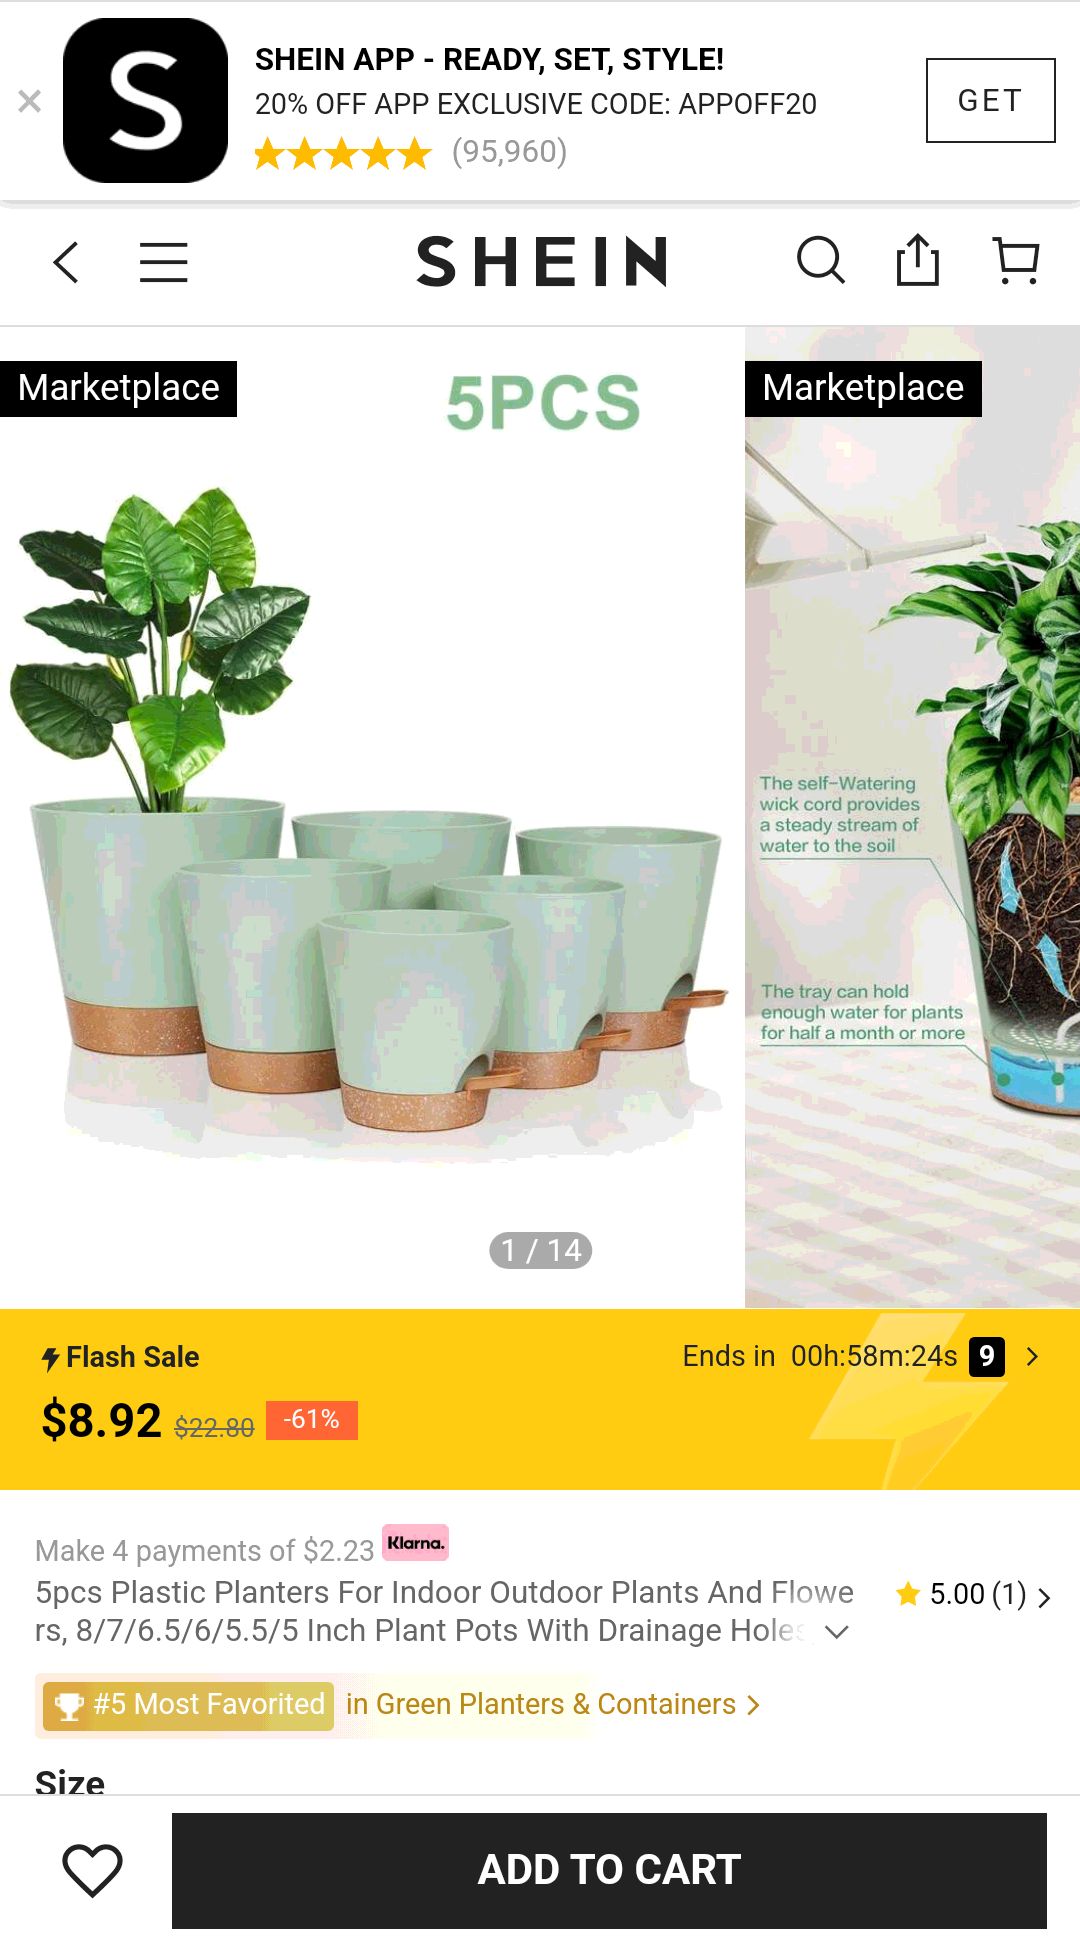 5pcs Plastic Planters for Indoor Outdoor Plants and Flowers, 8/7/6.5/6/5.5/5 Inch Plant Pots with Drainage Holes,Watering Wick / Lip | SHEIN USA